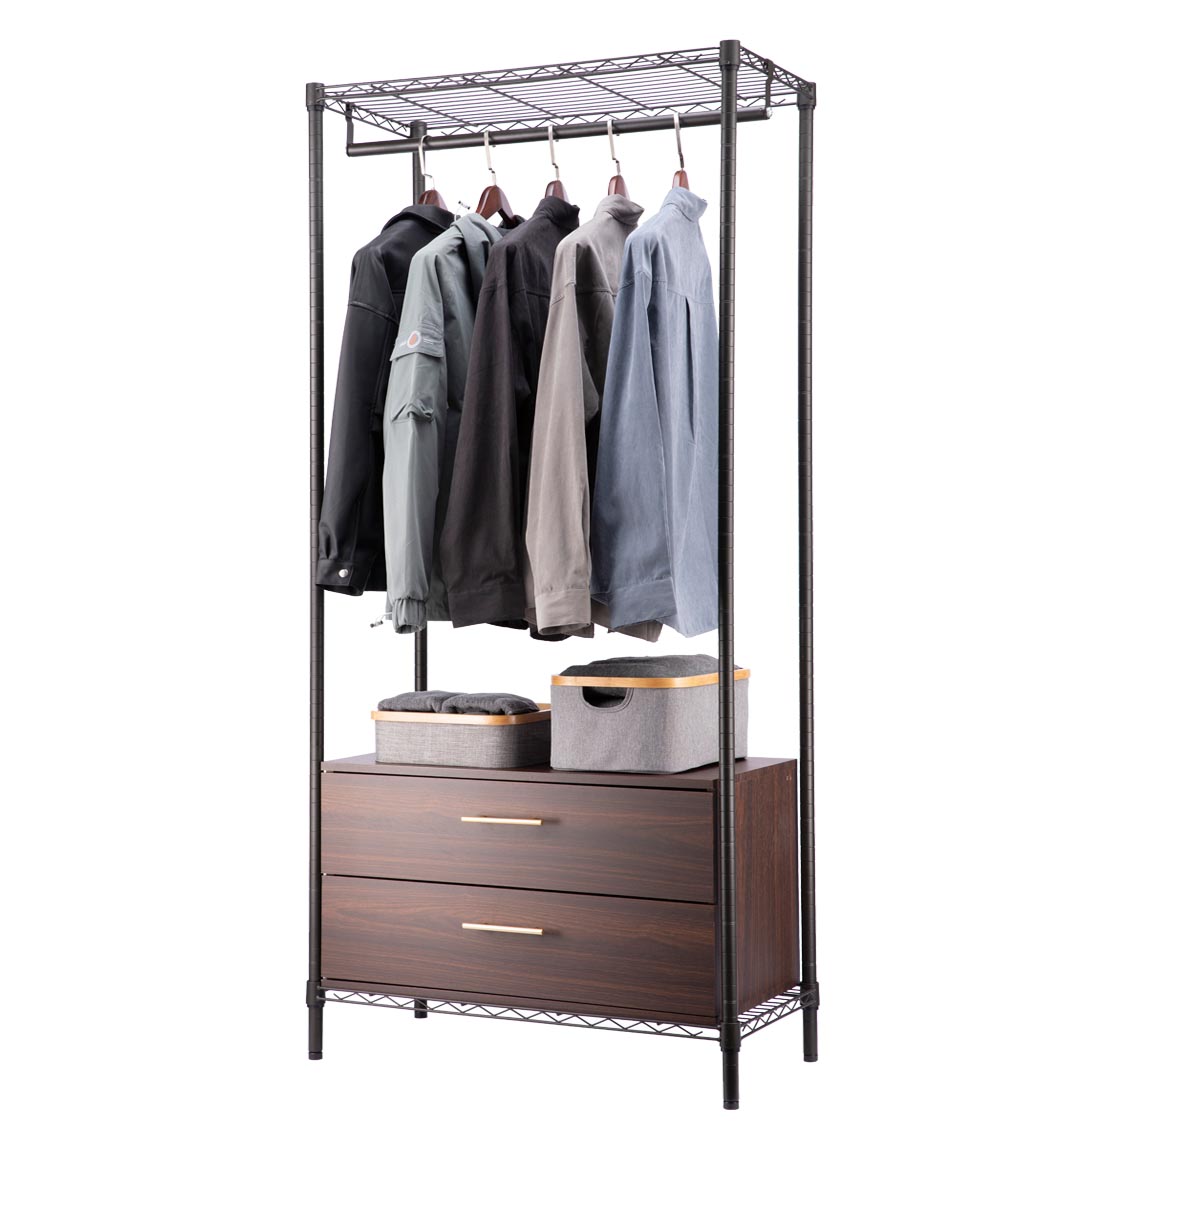 Heavy Duty Wire Garment Rack, Metal Clothing Rack with Hanging Rods / Freestanding Open Wardrobe Org